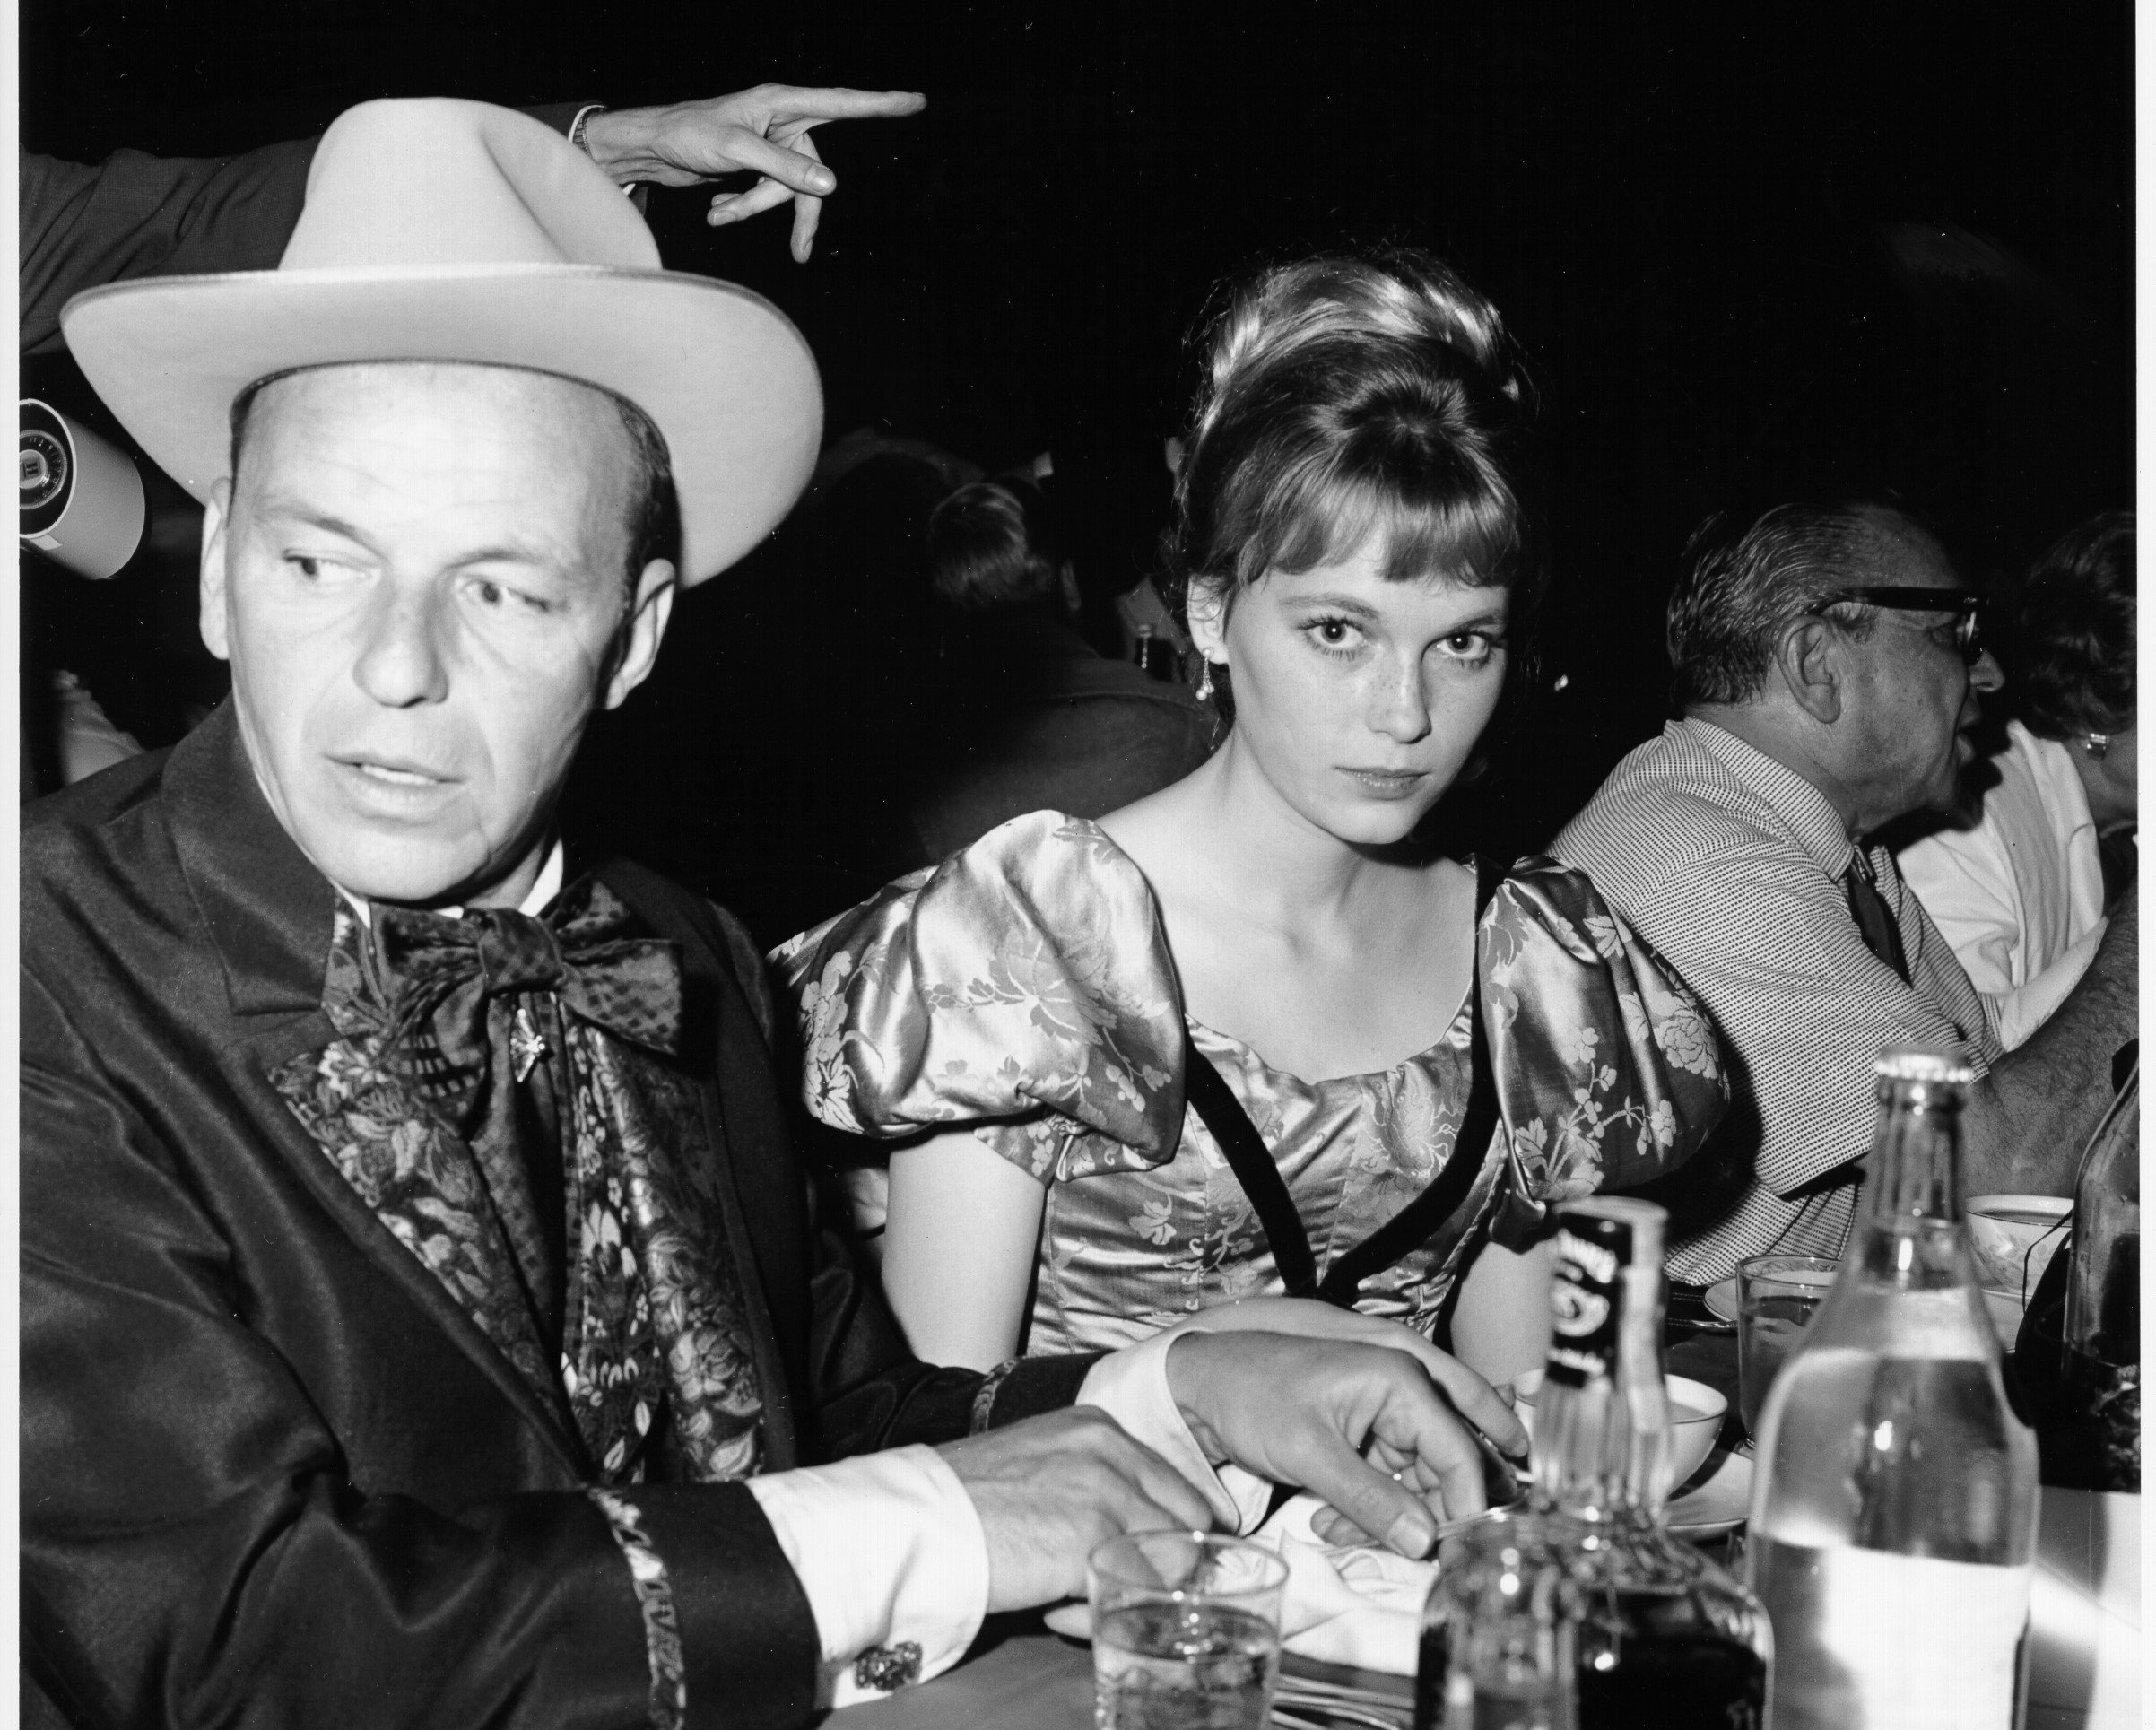 A black and white photo of Frank Sinatra and Mia Farrow sitting at a table. He wears a hat and she wears a dress with puffed sleeves.